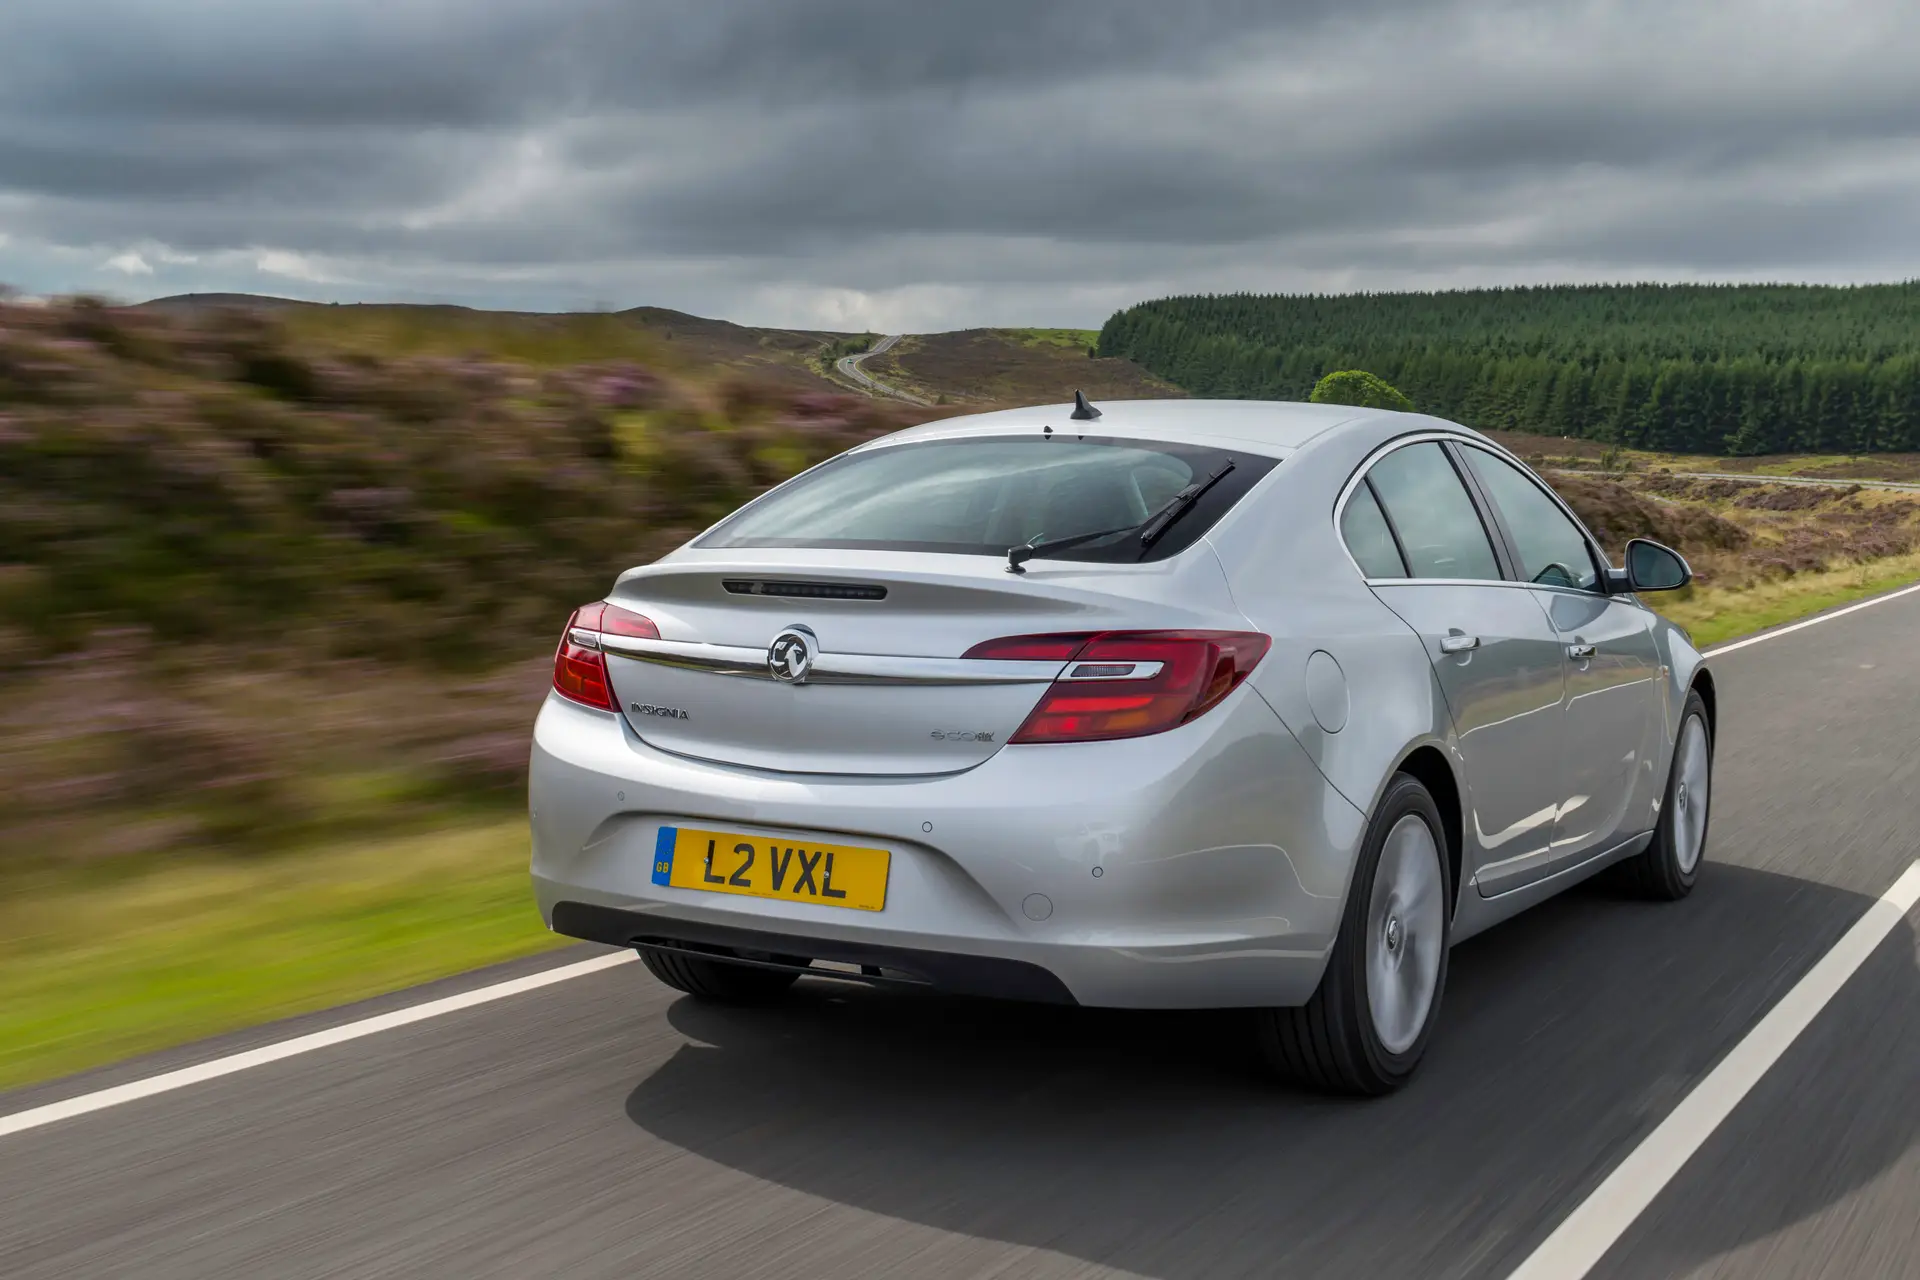 Used Vauxhall Insignia (2008-2017) Review Rear Side View